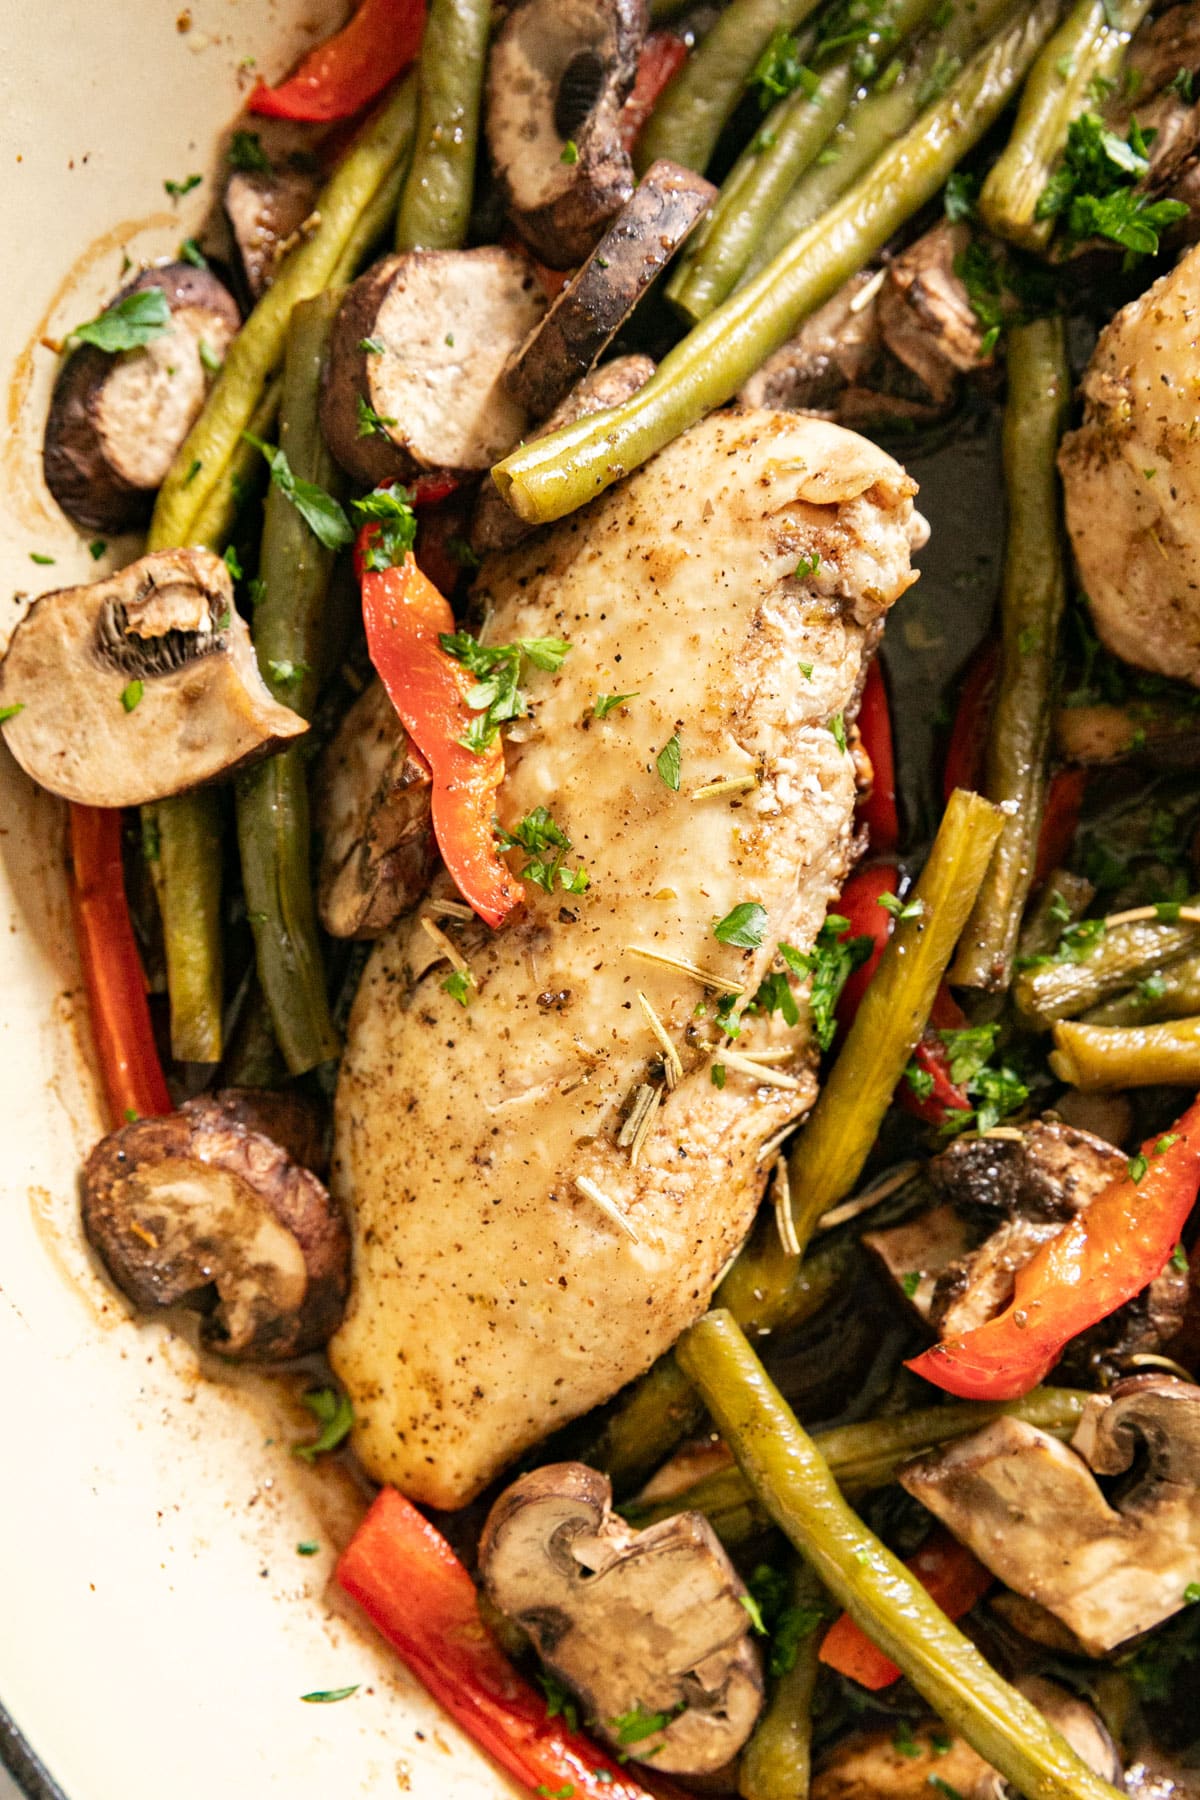 An close up overhead image of the chicken breast nestled in a skillet of green beans, peppers and mushrooms.